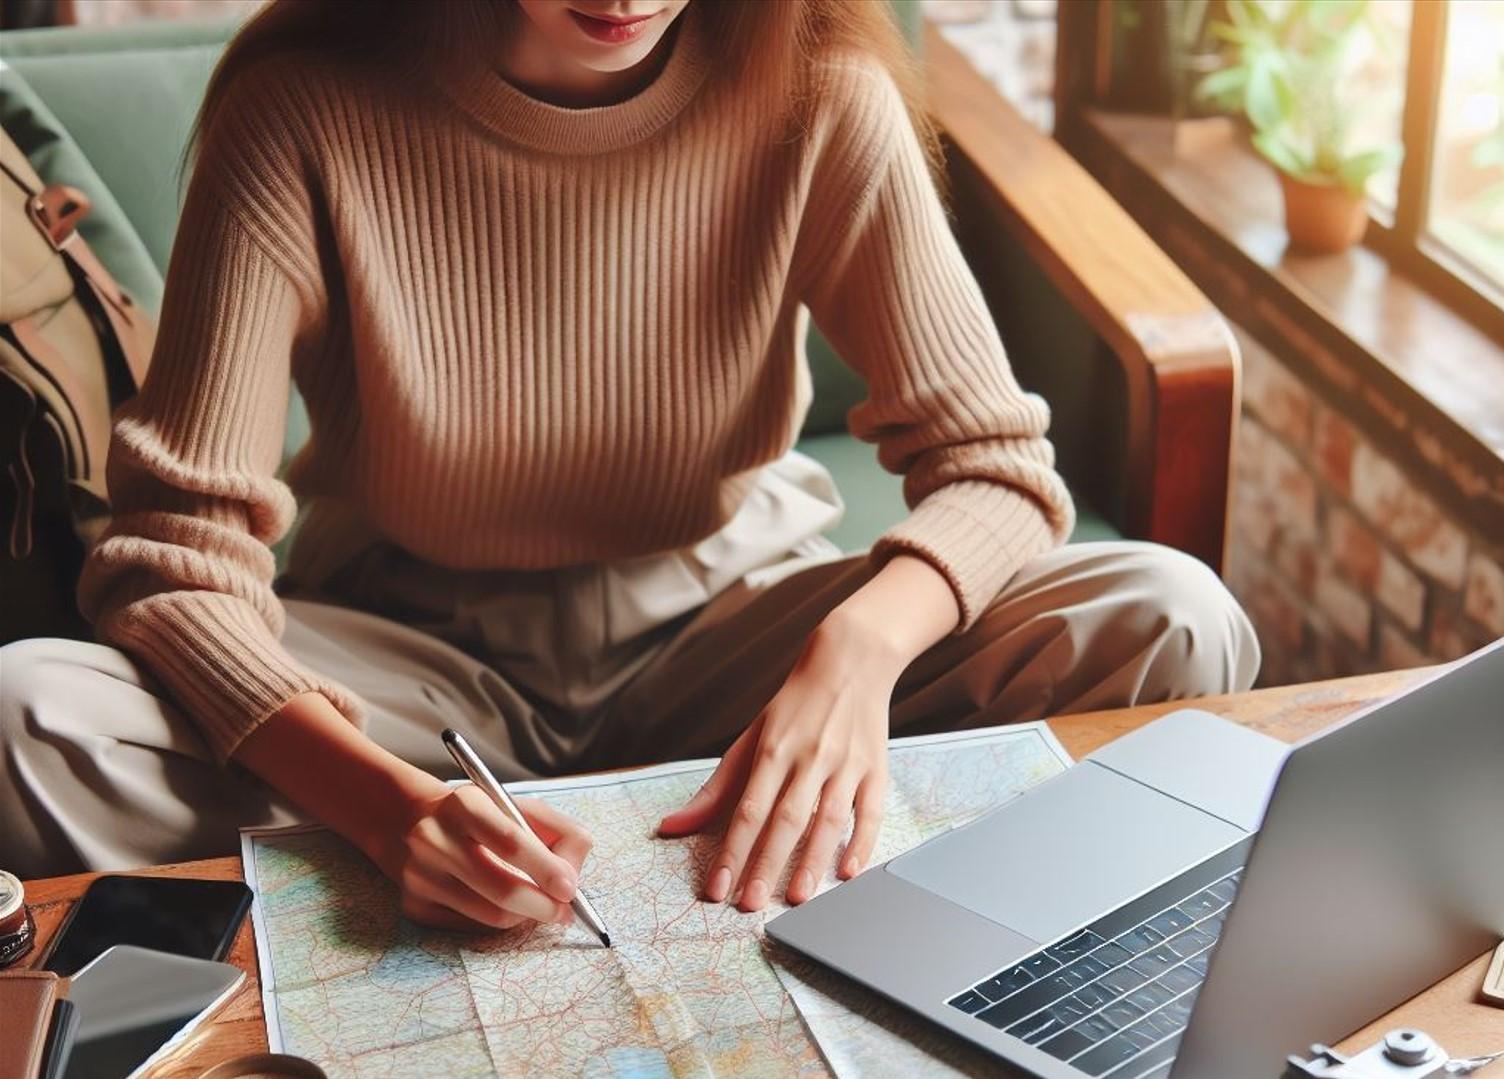 A female is planning a trip in front of the laptop and map.